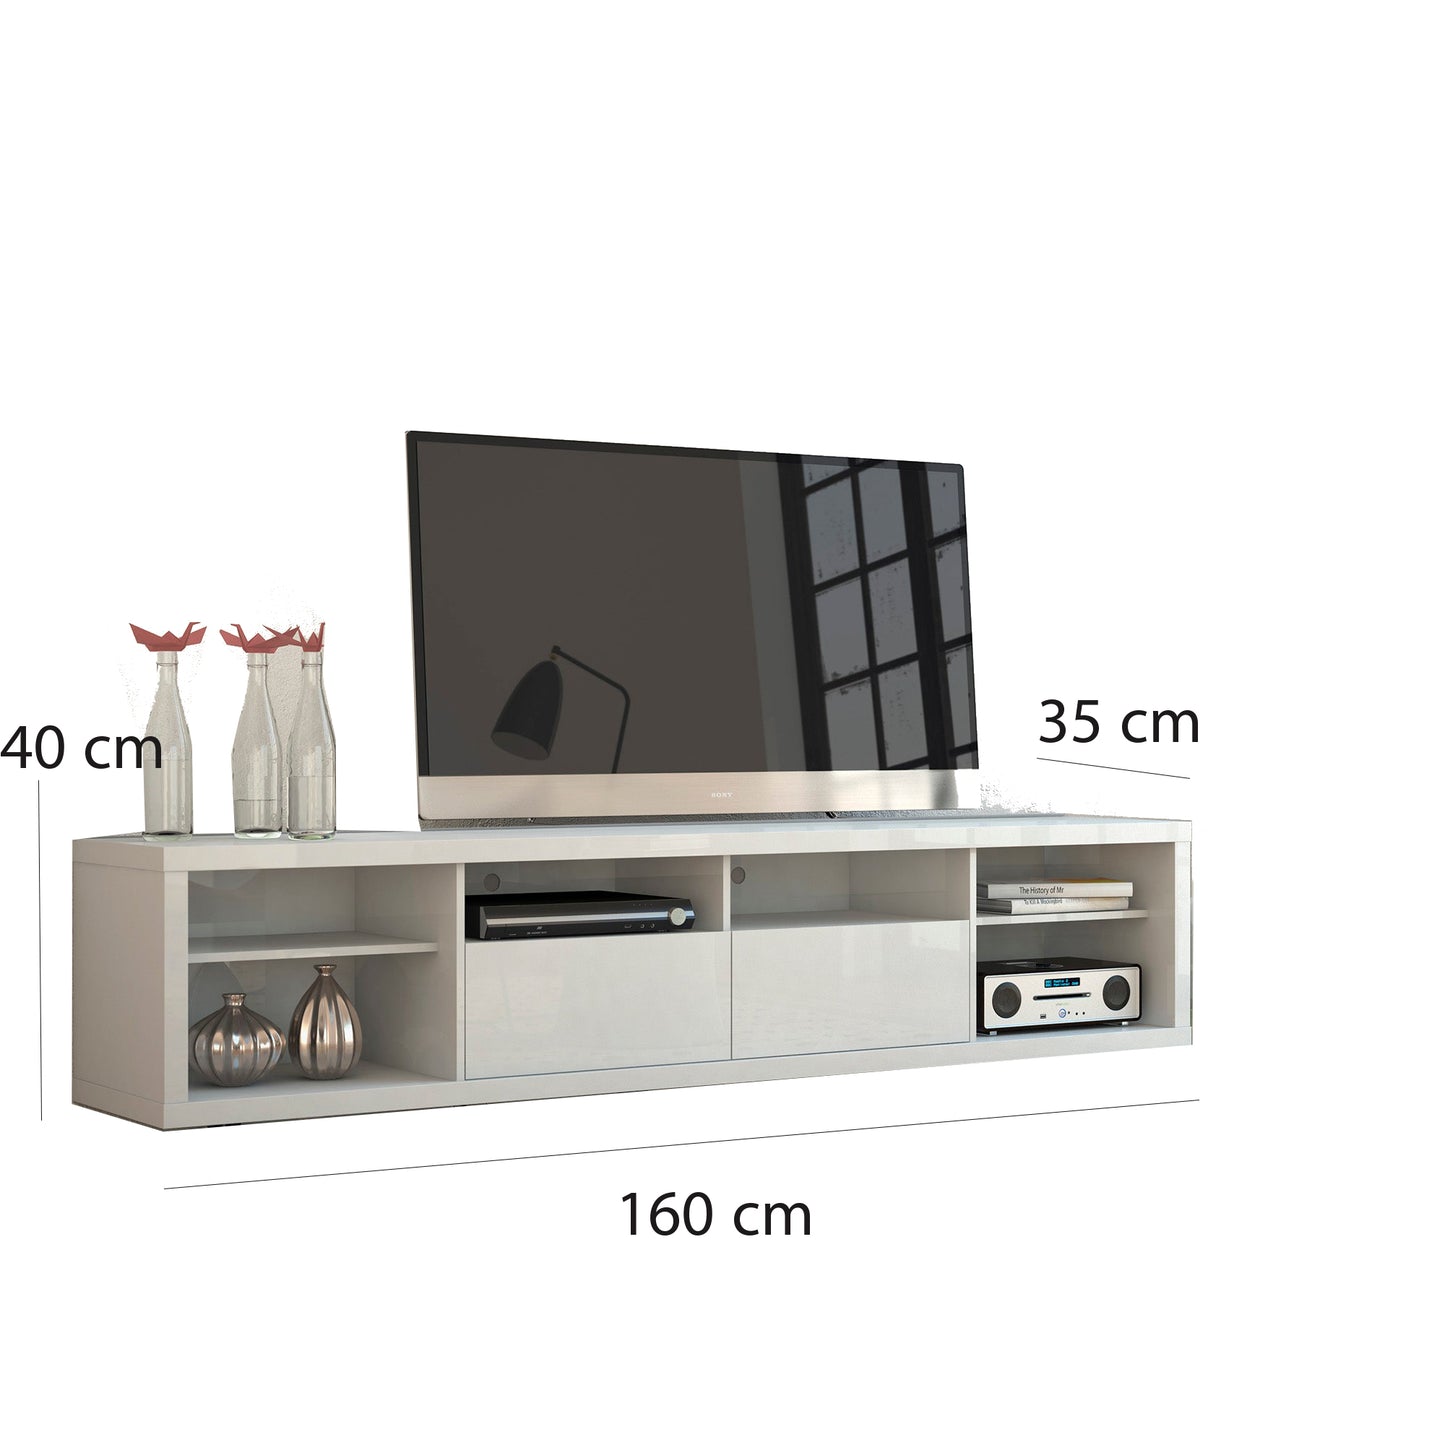 TV table 35×160 cm - FNH432